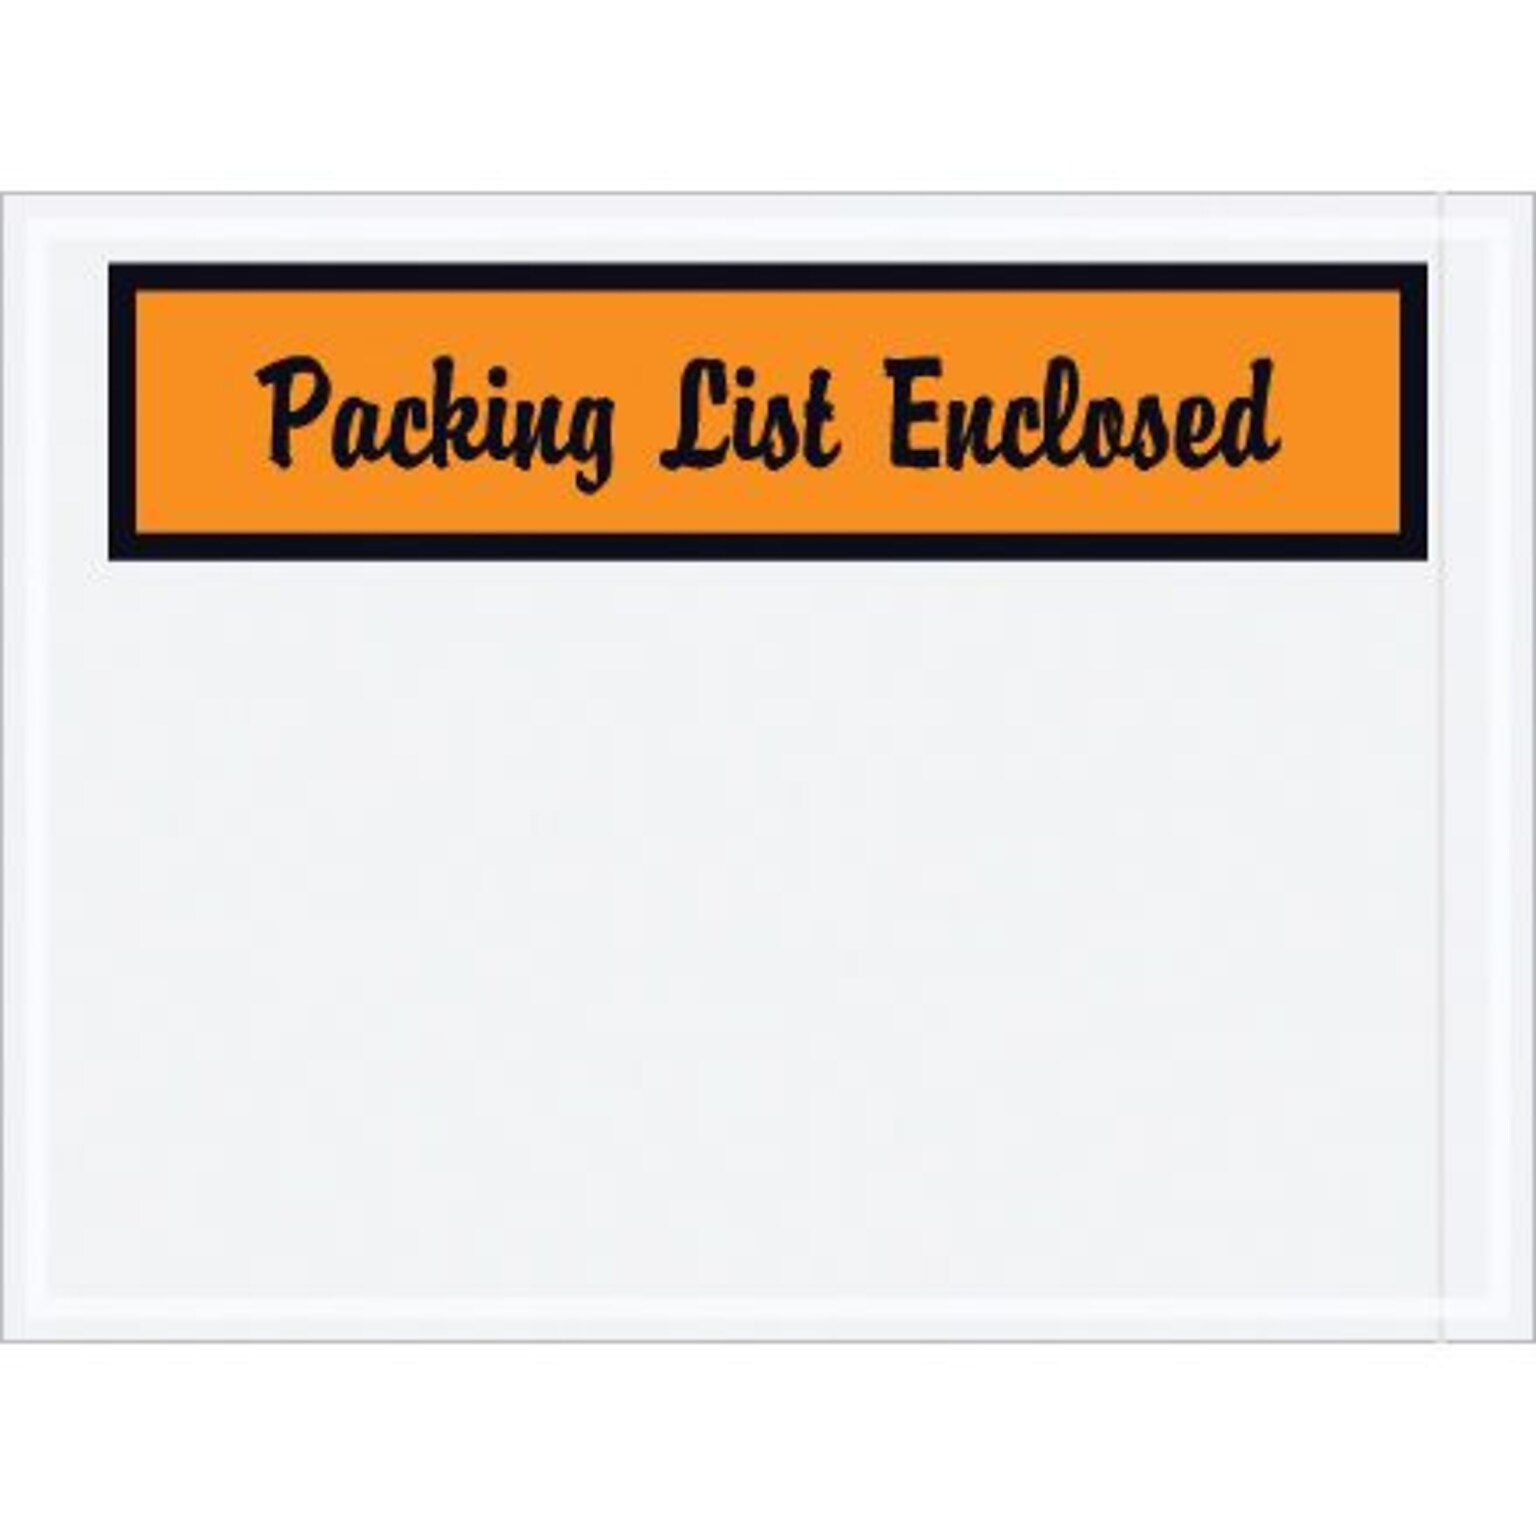 Quill Brand Packing List Envelope, 4 1/2 x 6 - Orange Panel Face, Packing List Enclosed, 1000/Case